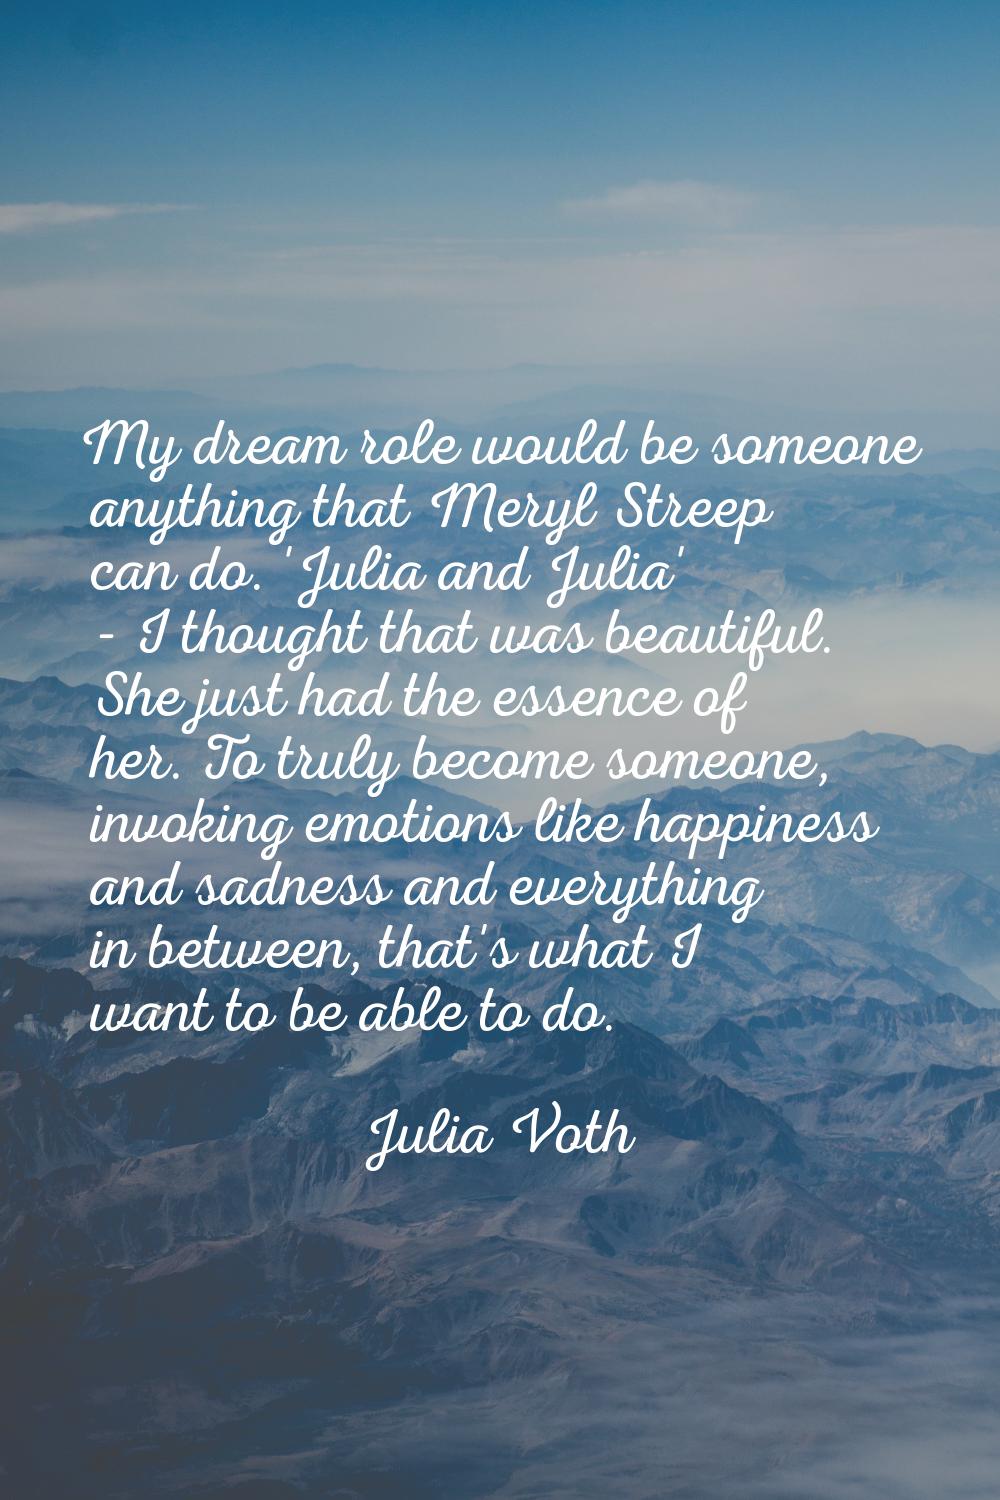 My dream role would be someone anything that Meryl Streep can do. 'Julia and Julia' - I thought tha